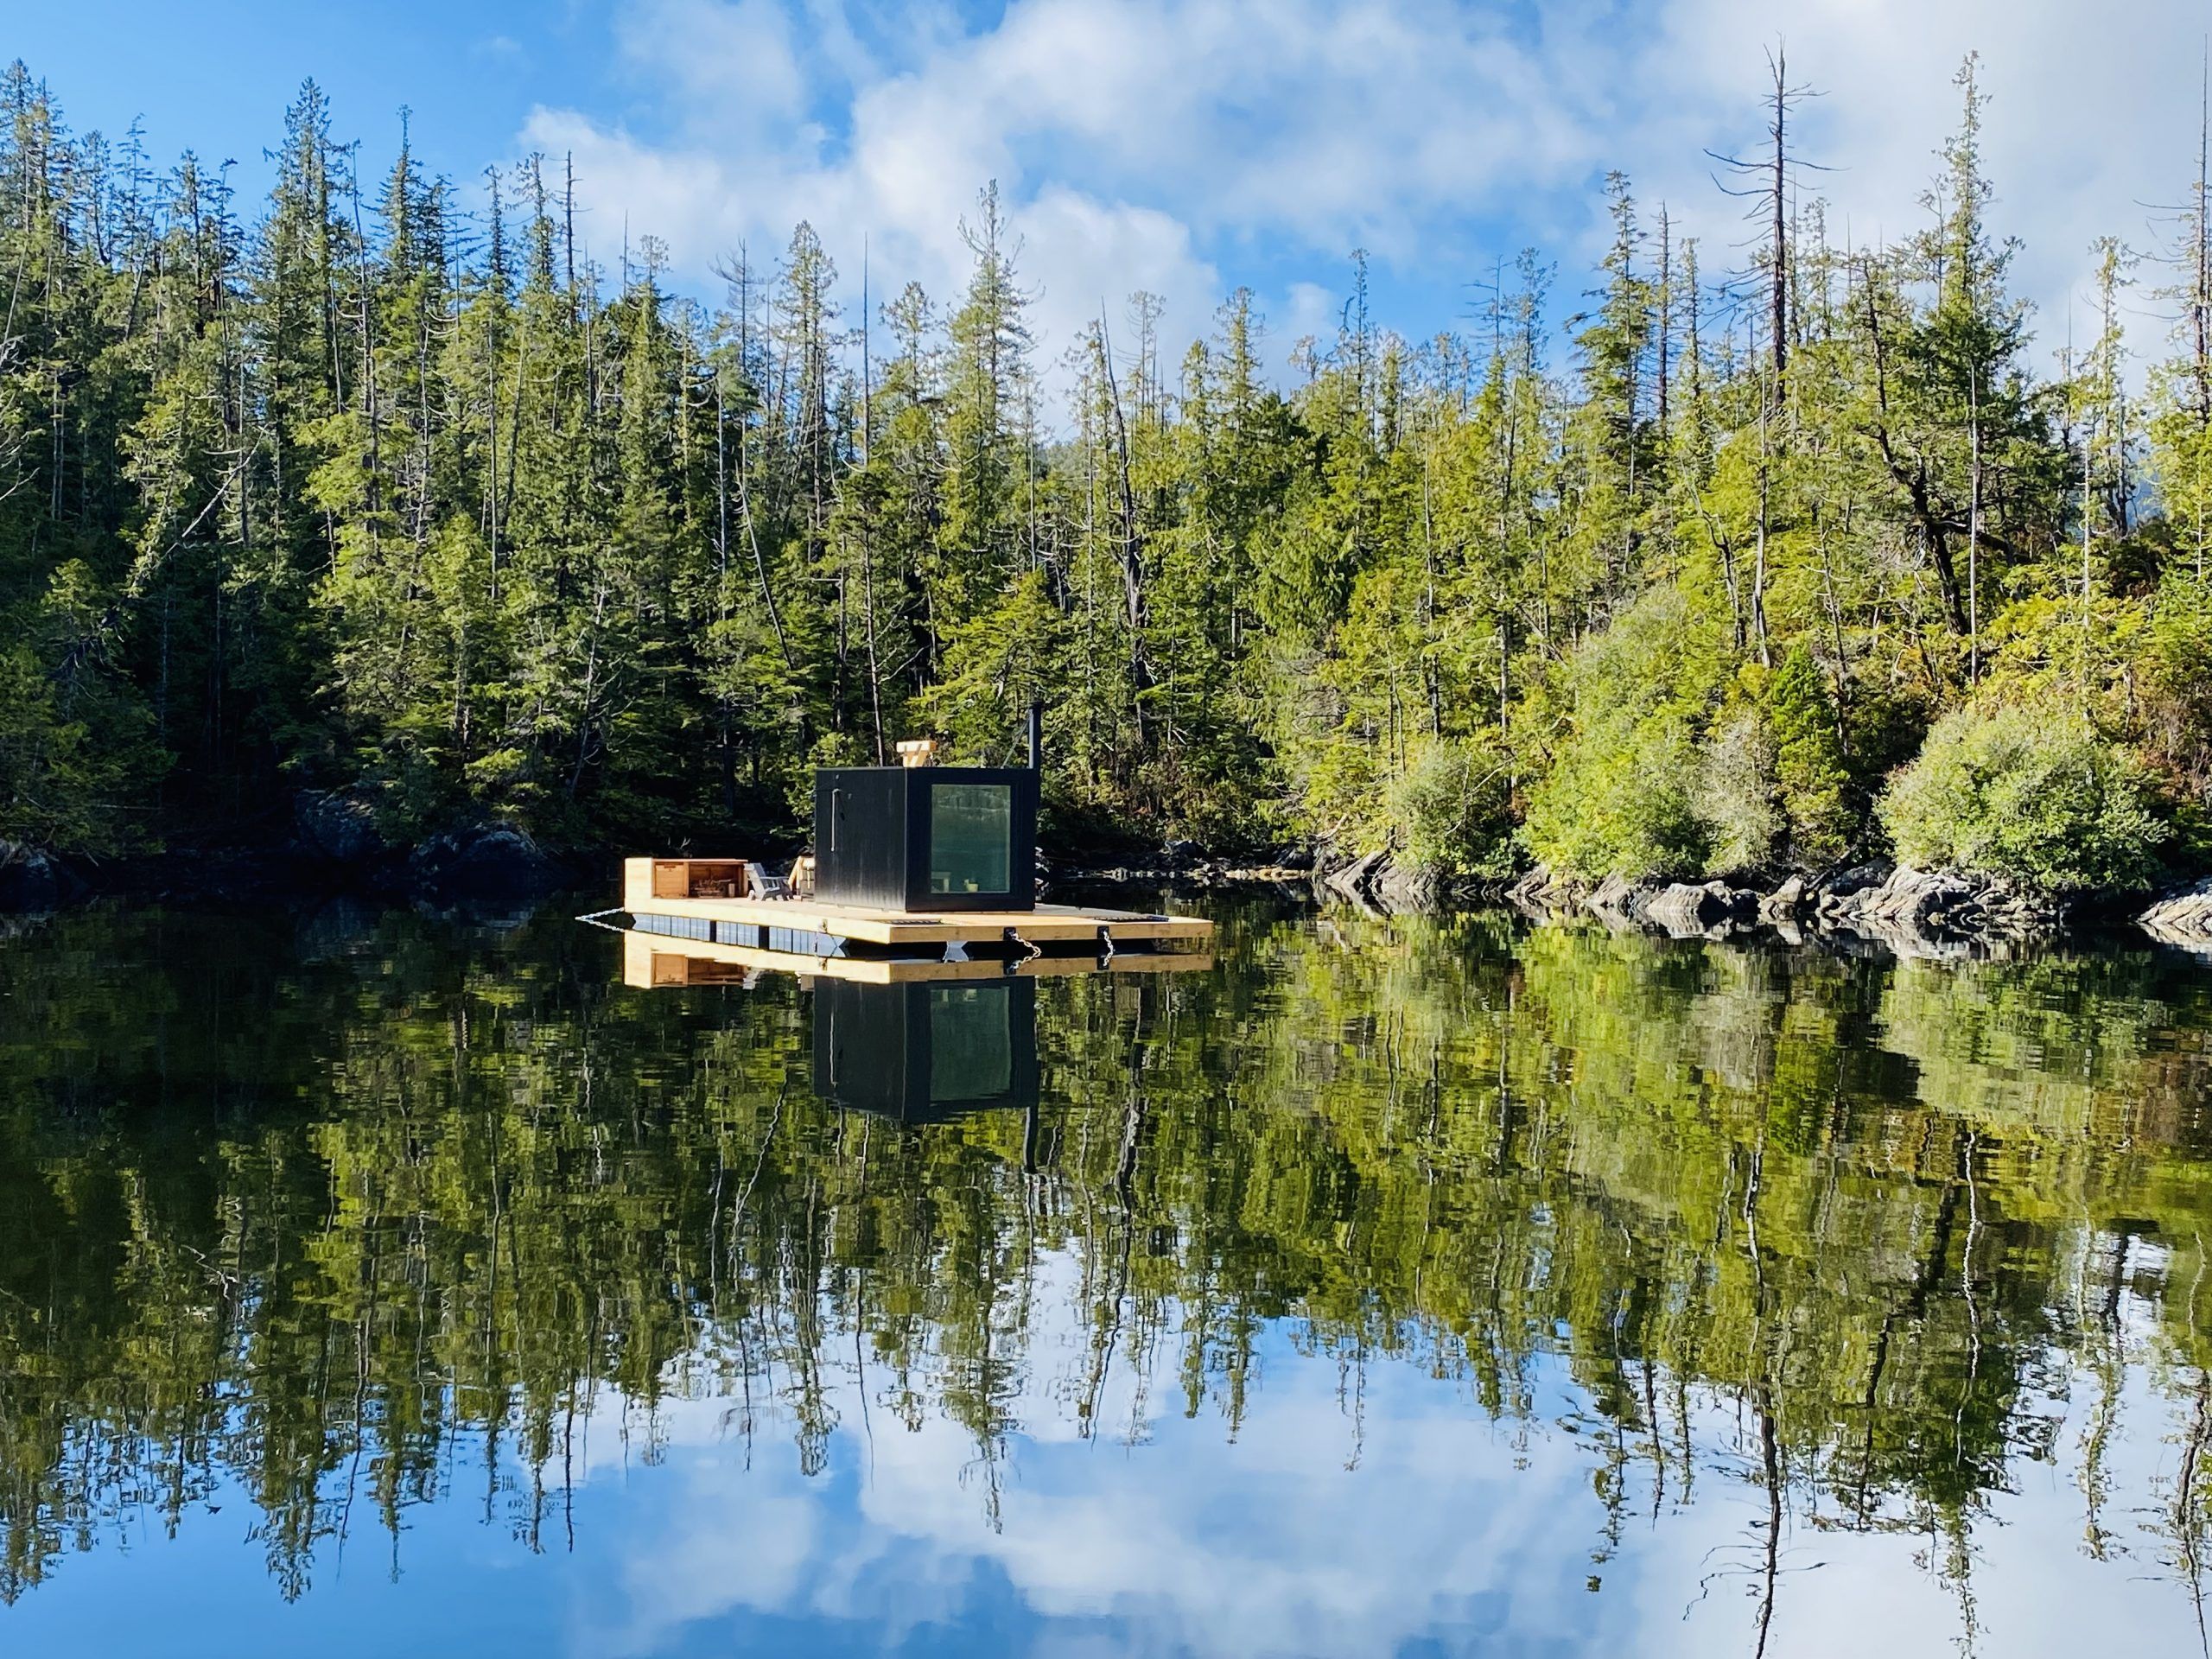 The new floating sauna near Tofino sits on a floating dock in Clayoquot Sound - one of the prettiest spots on the planet.